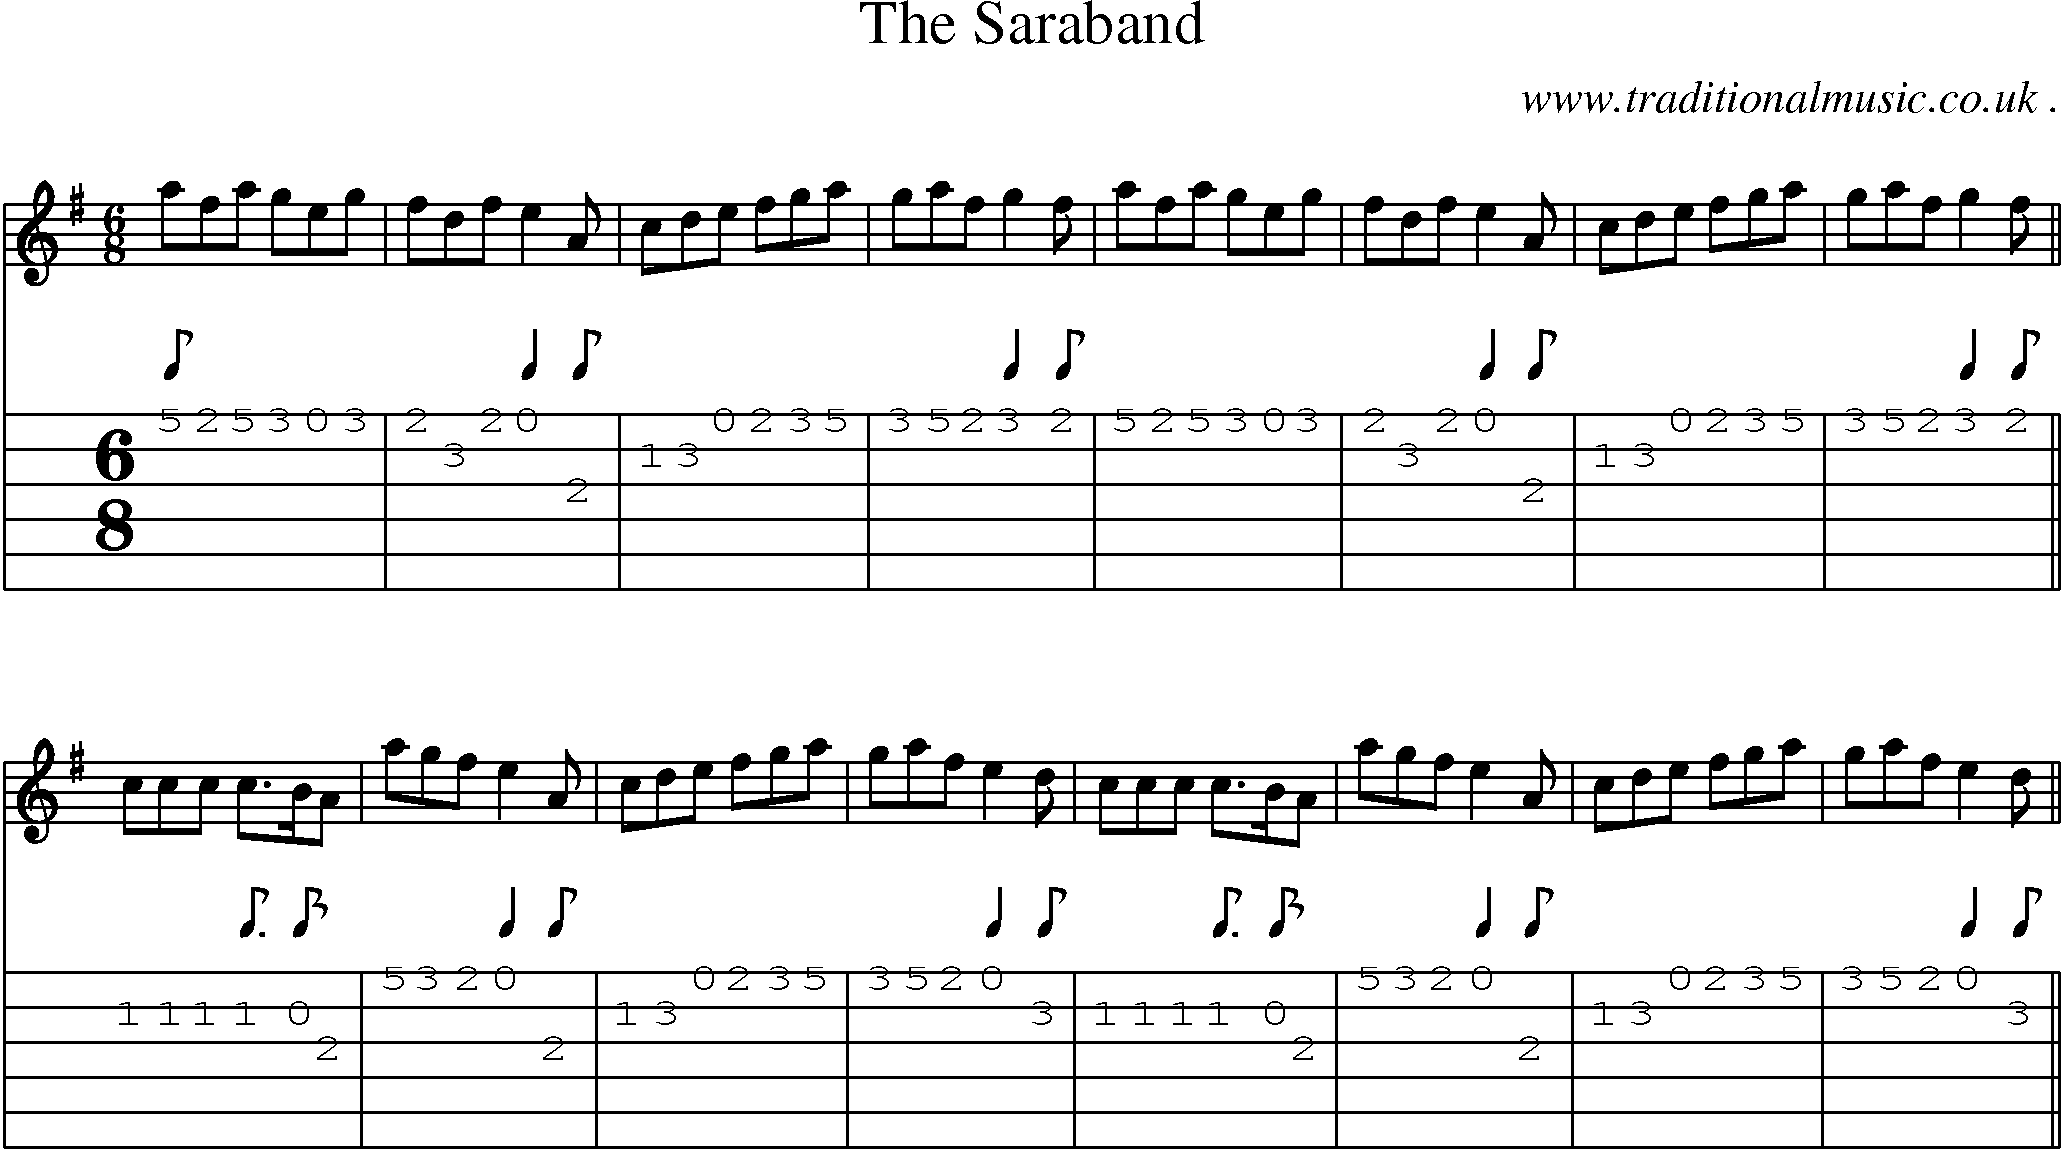 Sheet-Music and Guitar Tabs for The Saraband